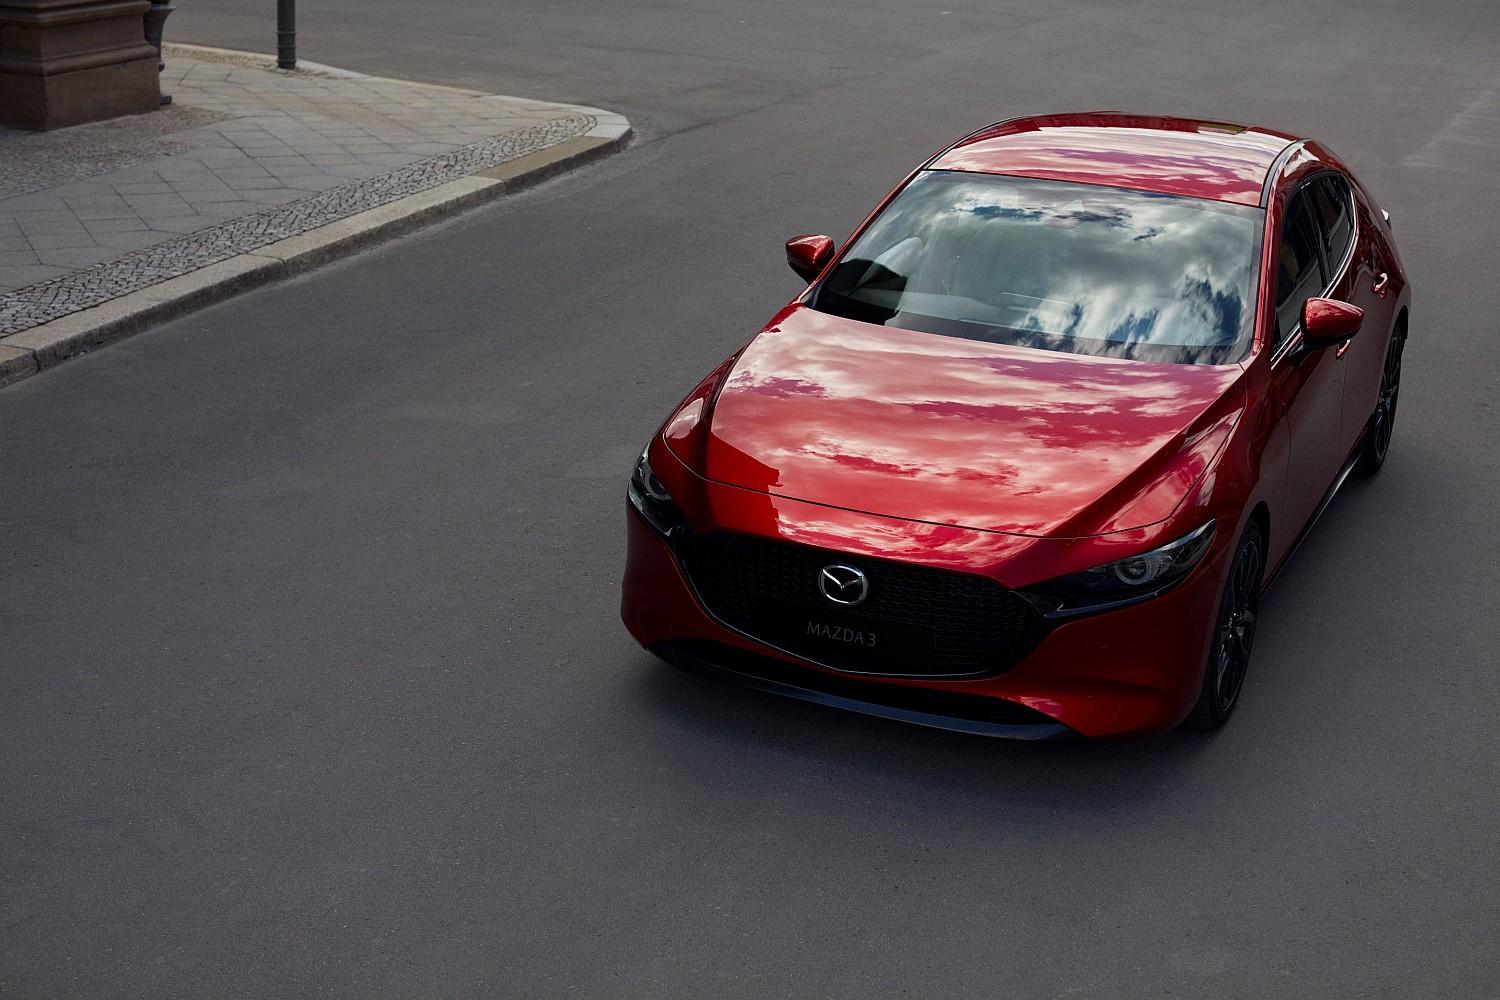 01_All-New-Mazda3_5HB_EXT_lowres